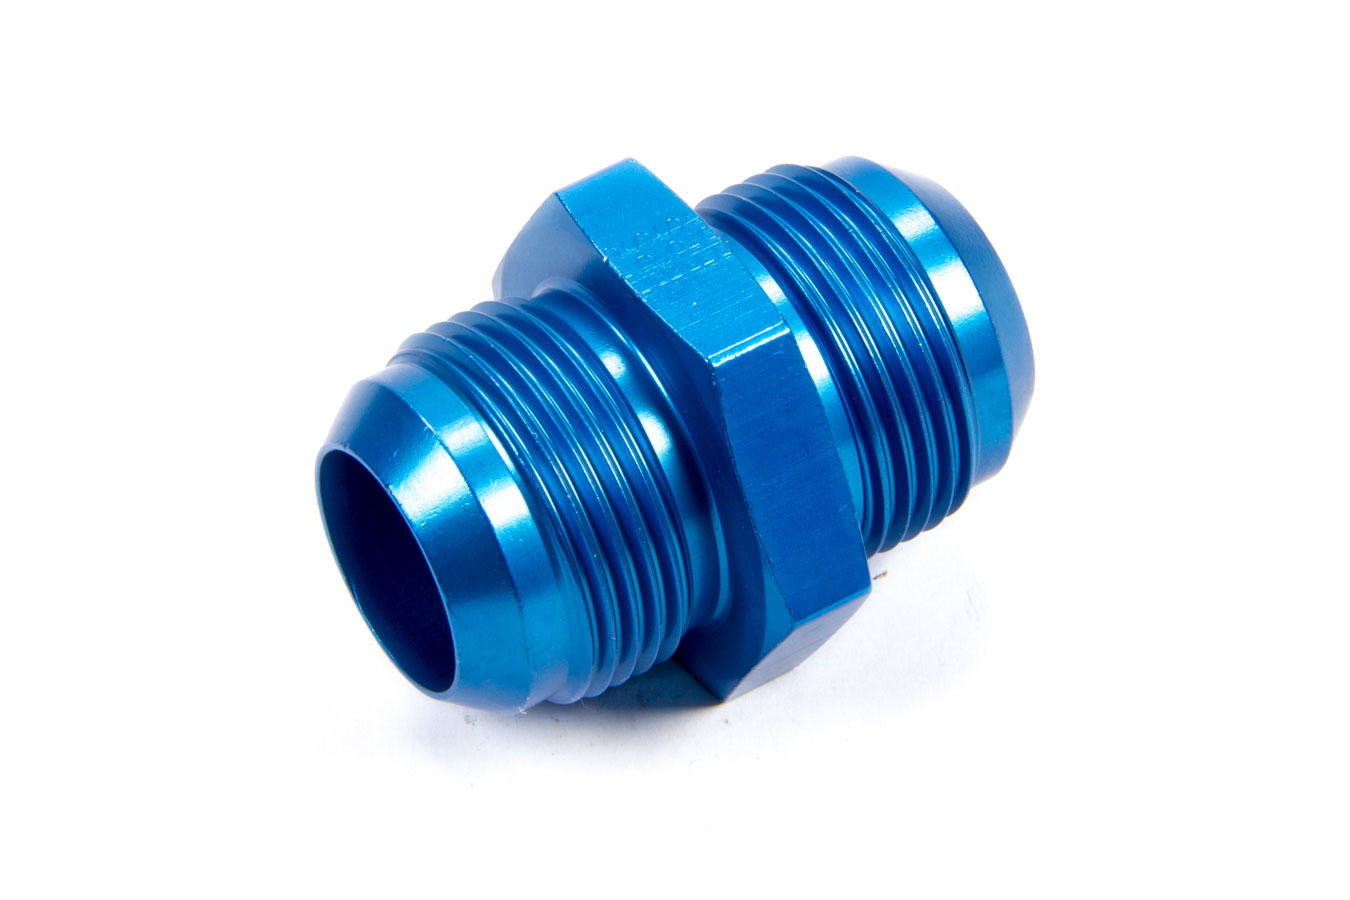 Fragola 481516 Fitting, Adapter, Straight, 16 AN Male to 16 AN Male, Aluminum, Blue Anodized, Each